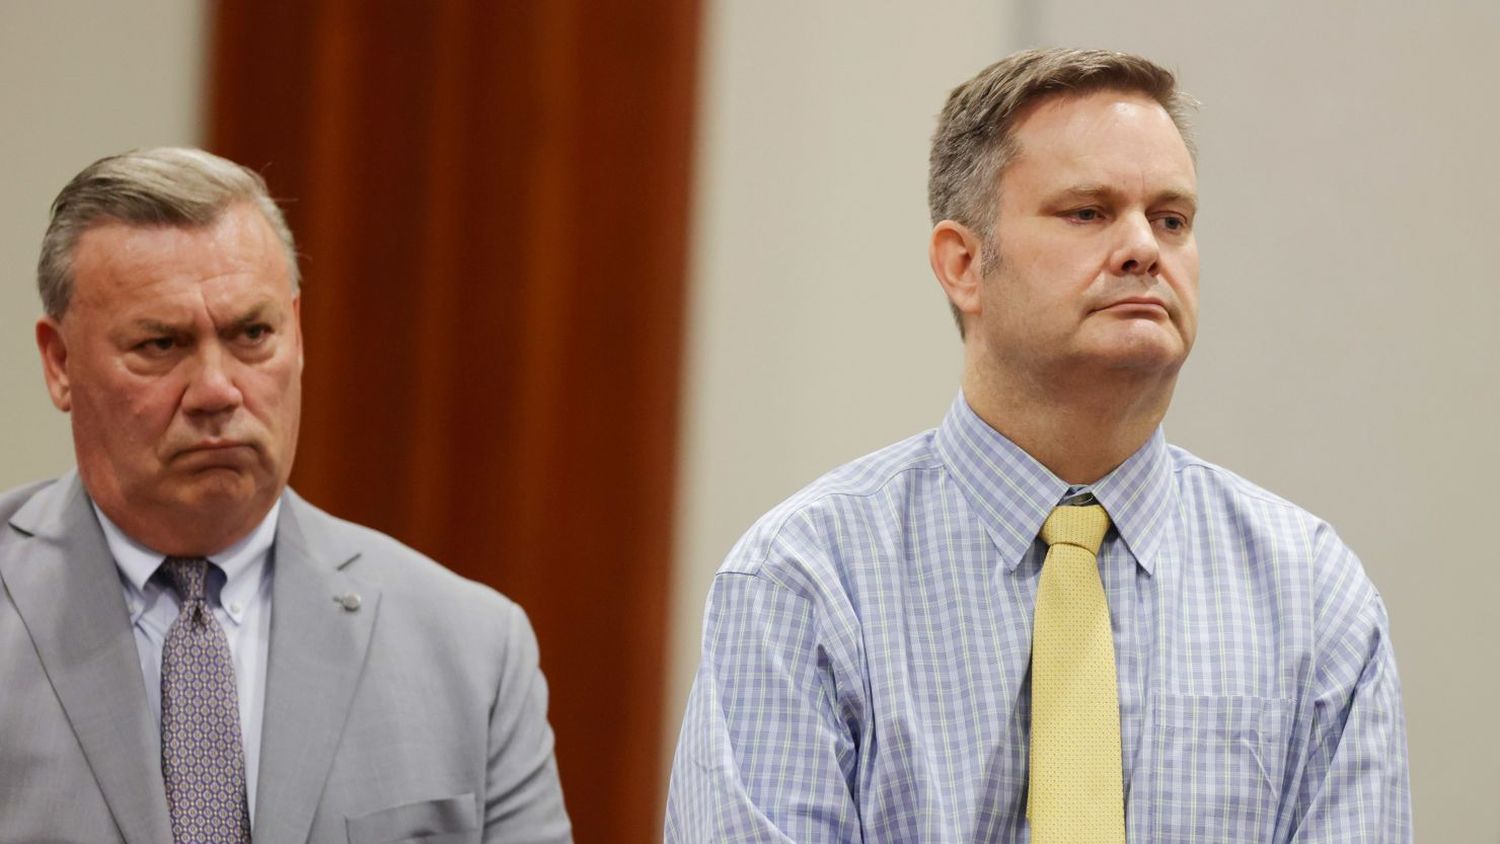 Chad Daybell, right, stands with defense lawyer John Prior as the jury's verdict in his murder trial